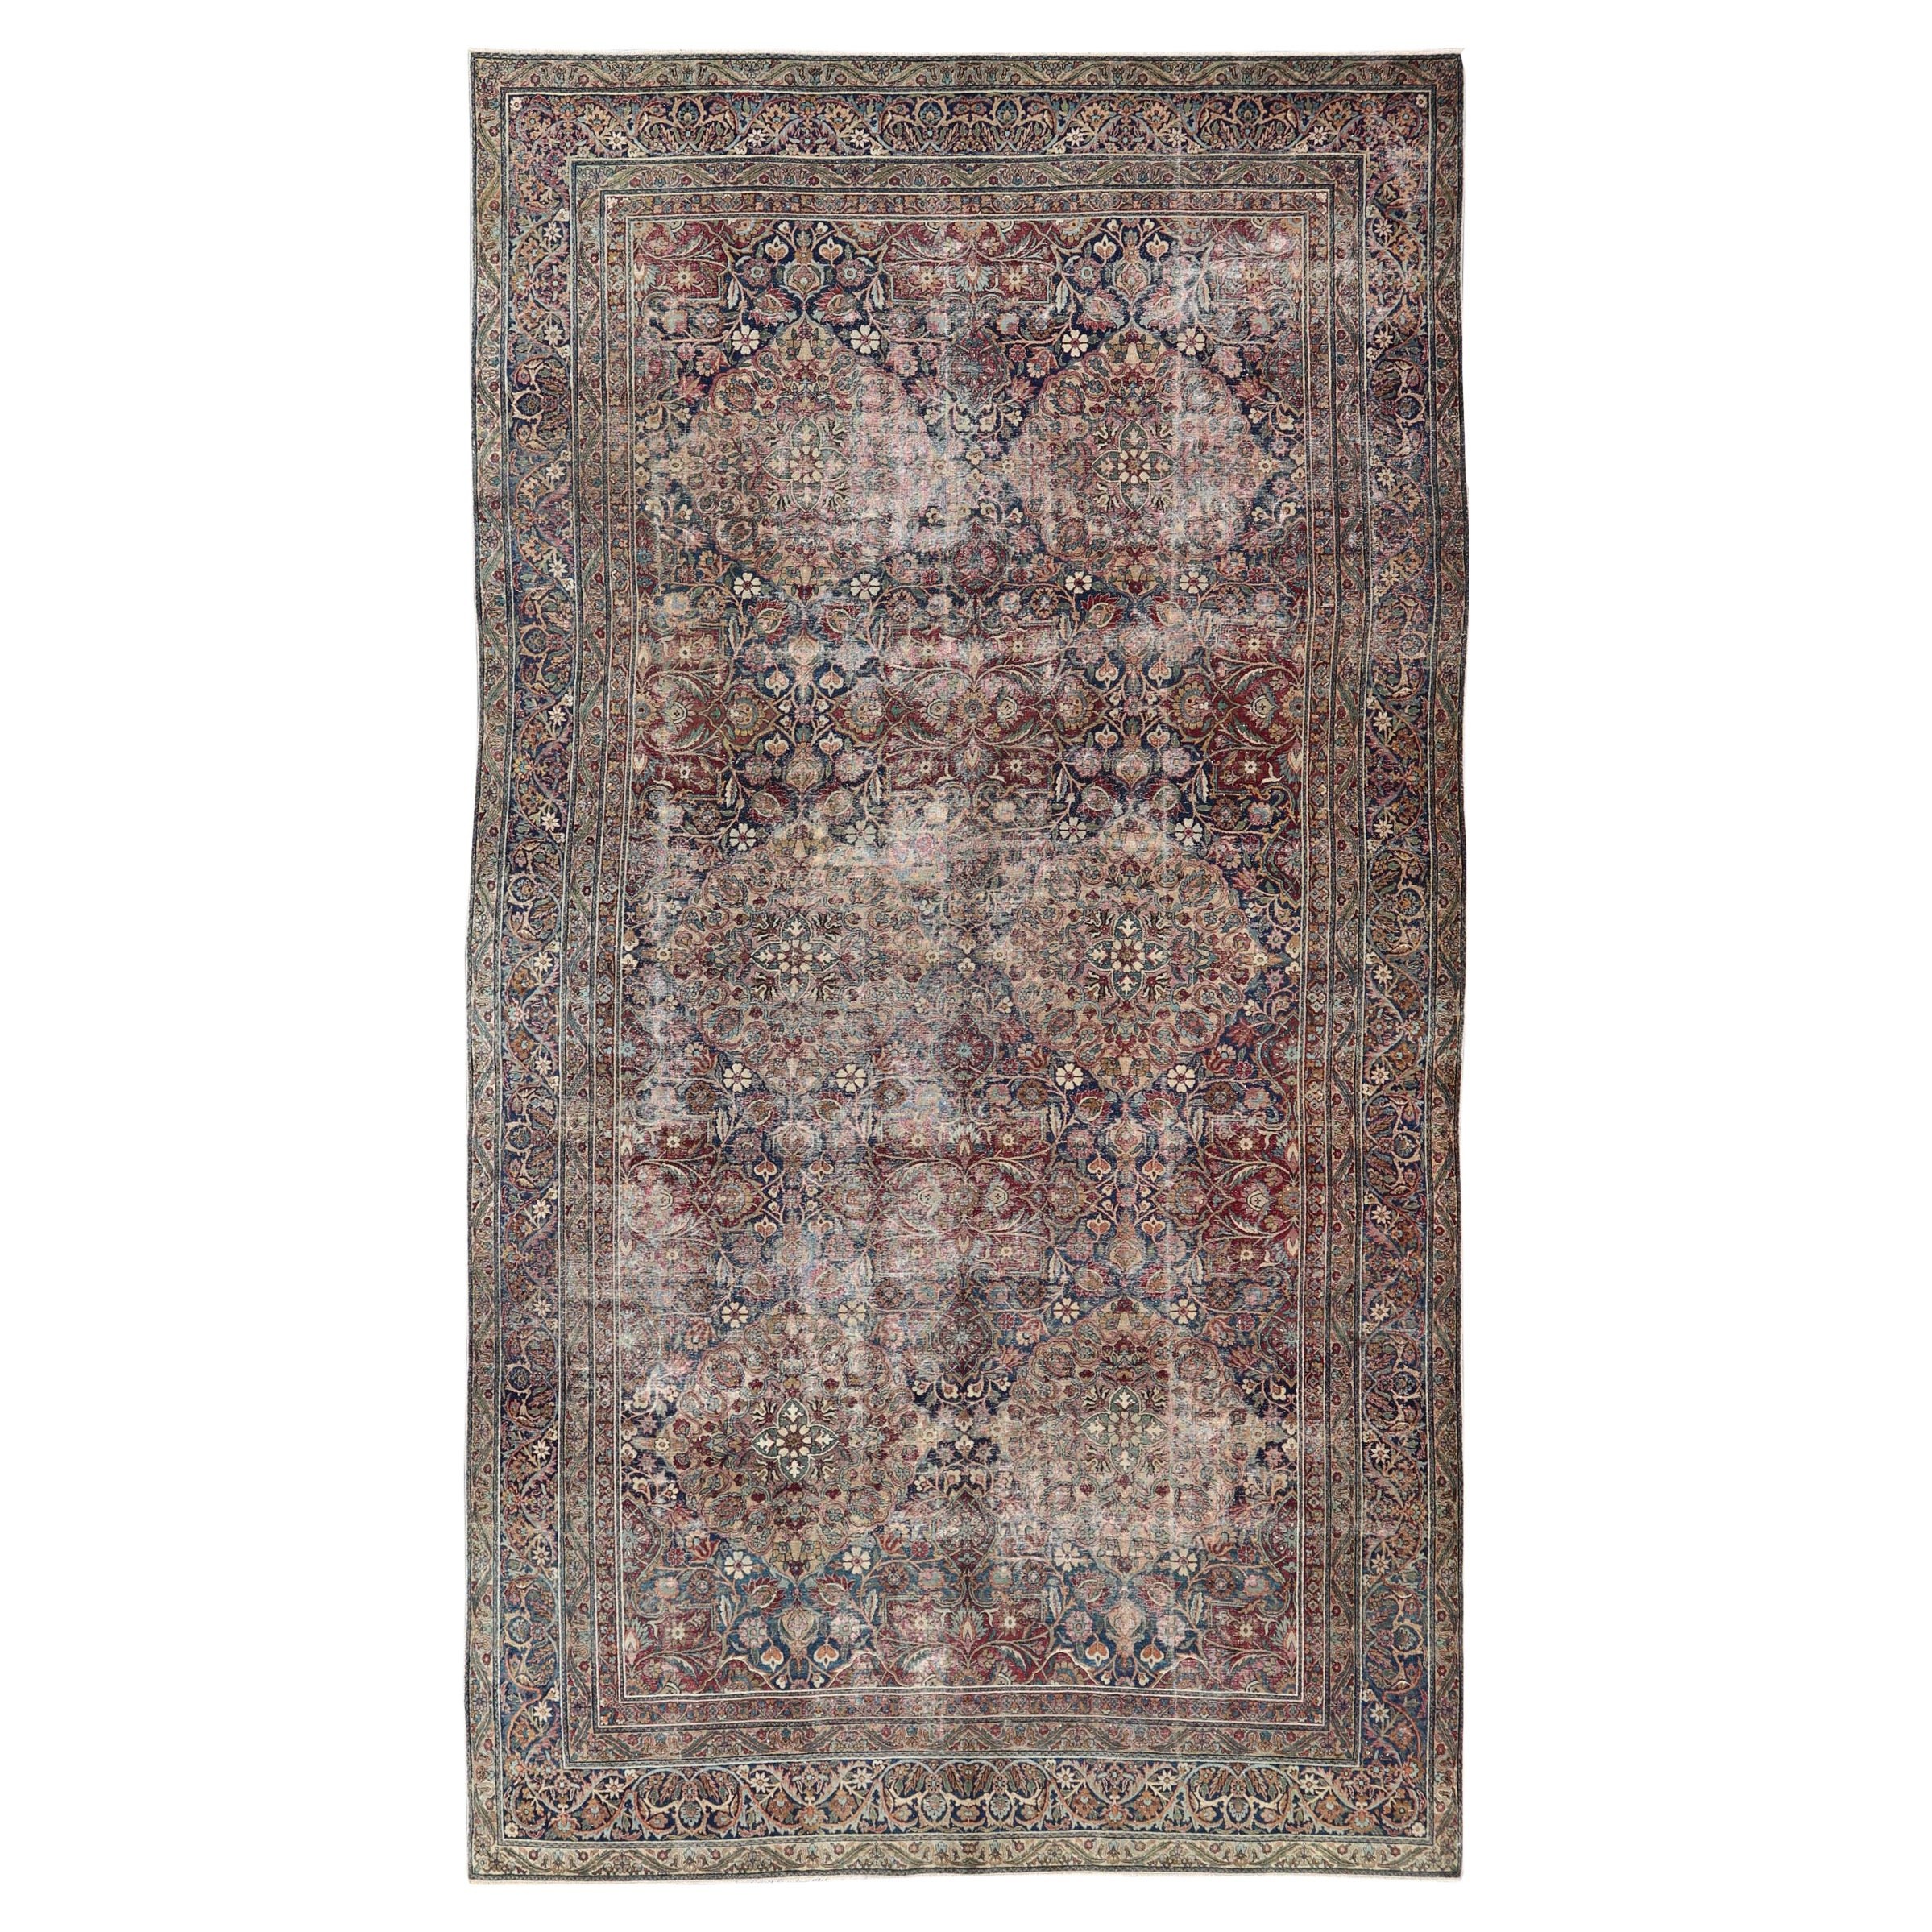 Antique Persian Lavar Kerman Large Gallery Rug with All-Over Floral Design For Sale